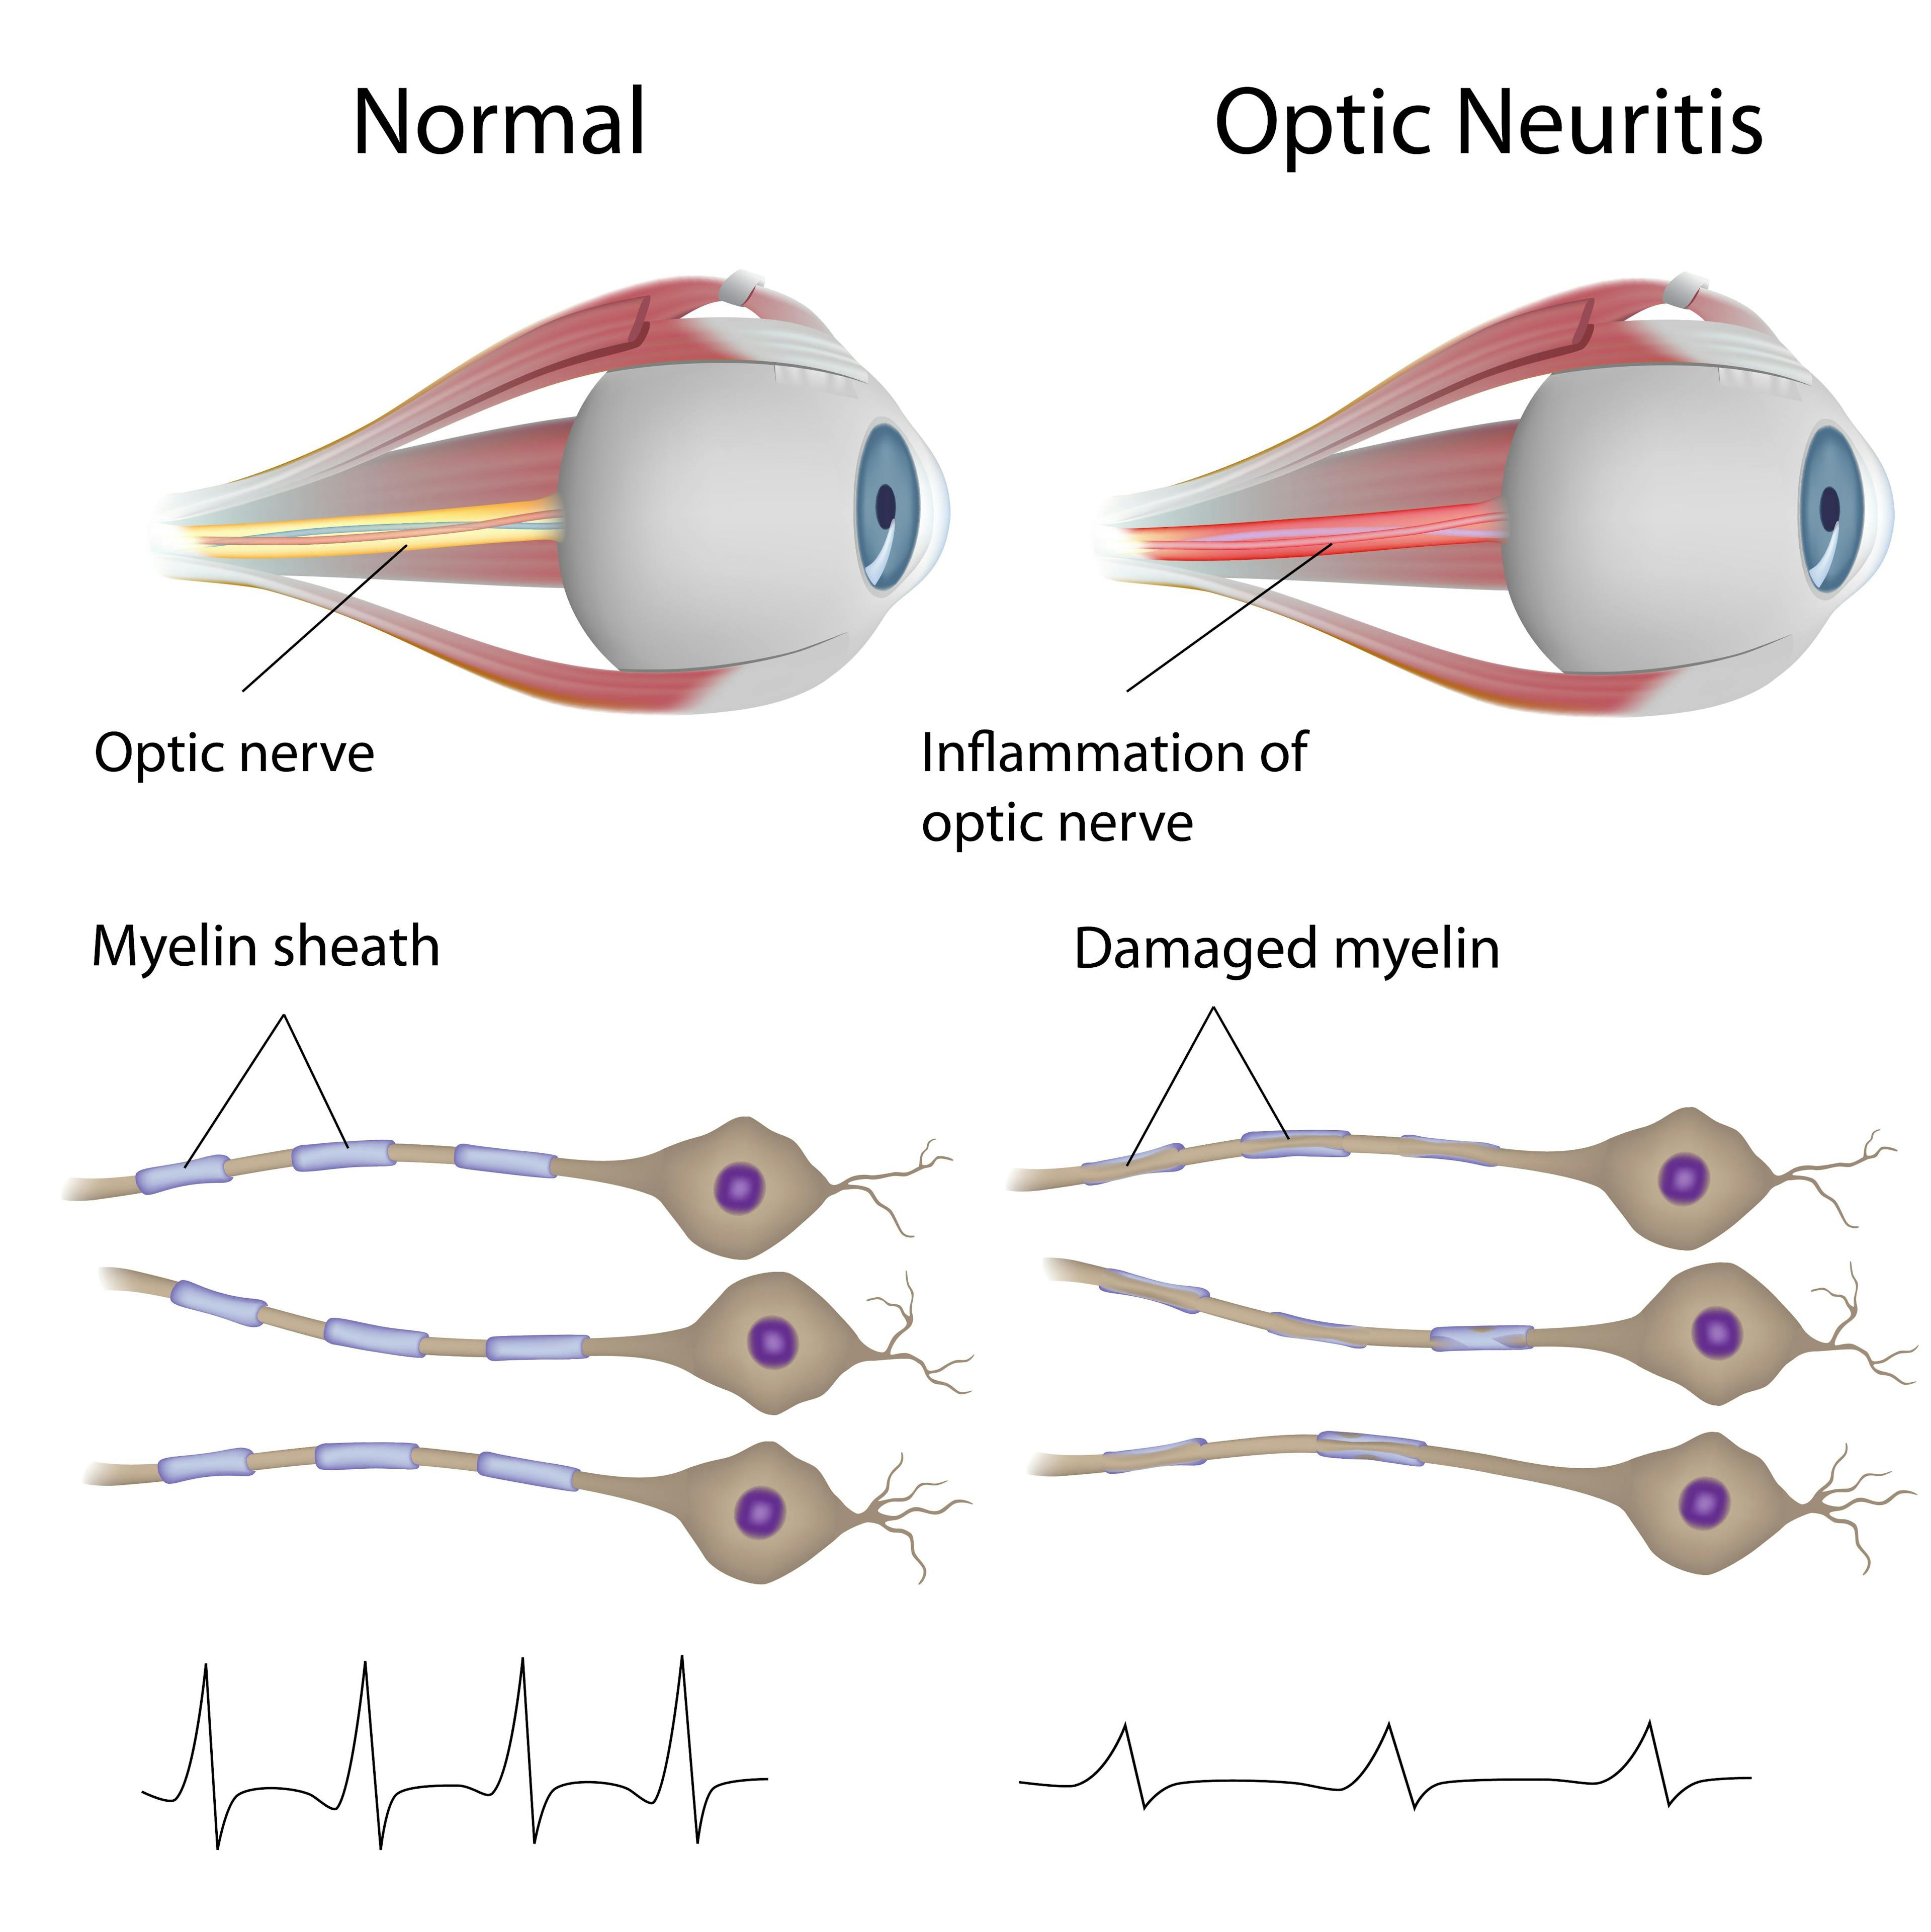 Optic Neuritis and COVID-19 vaccine connection?